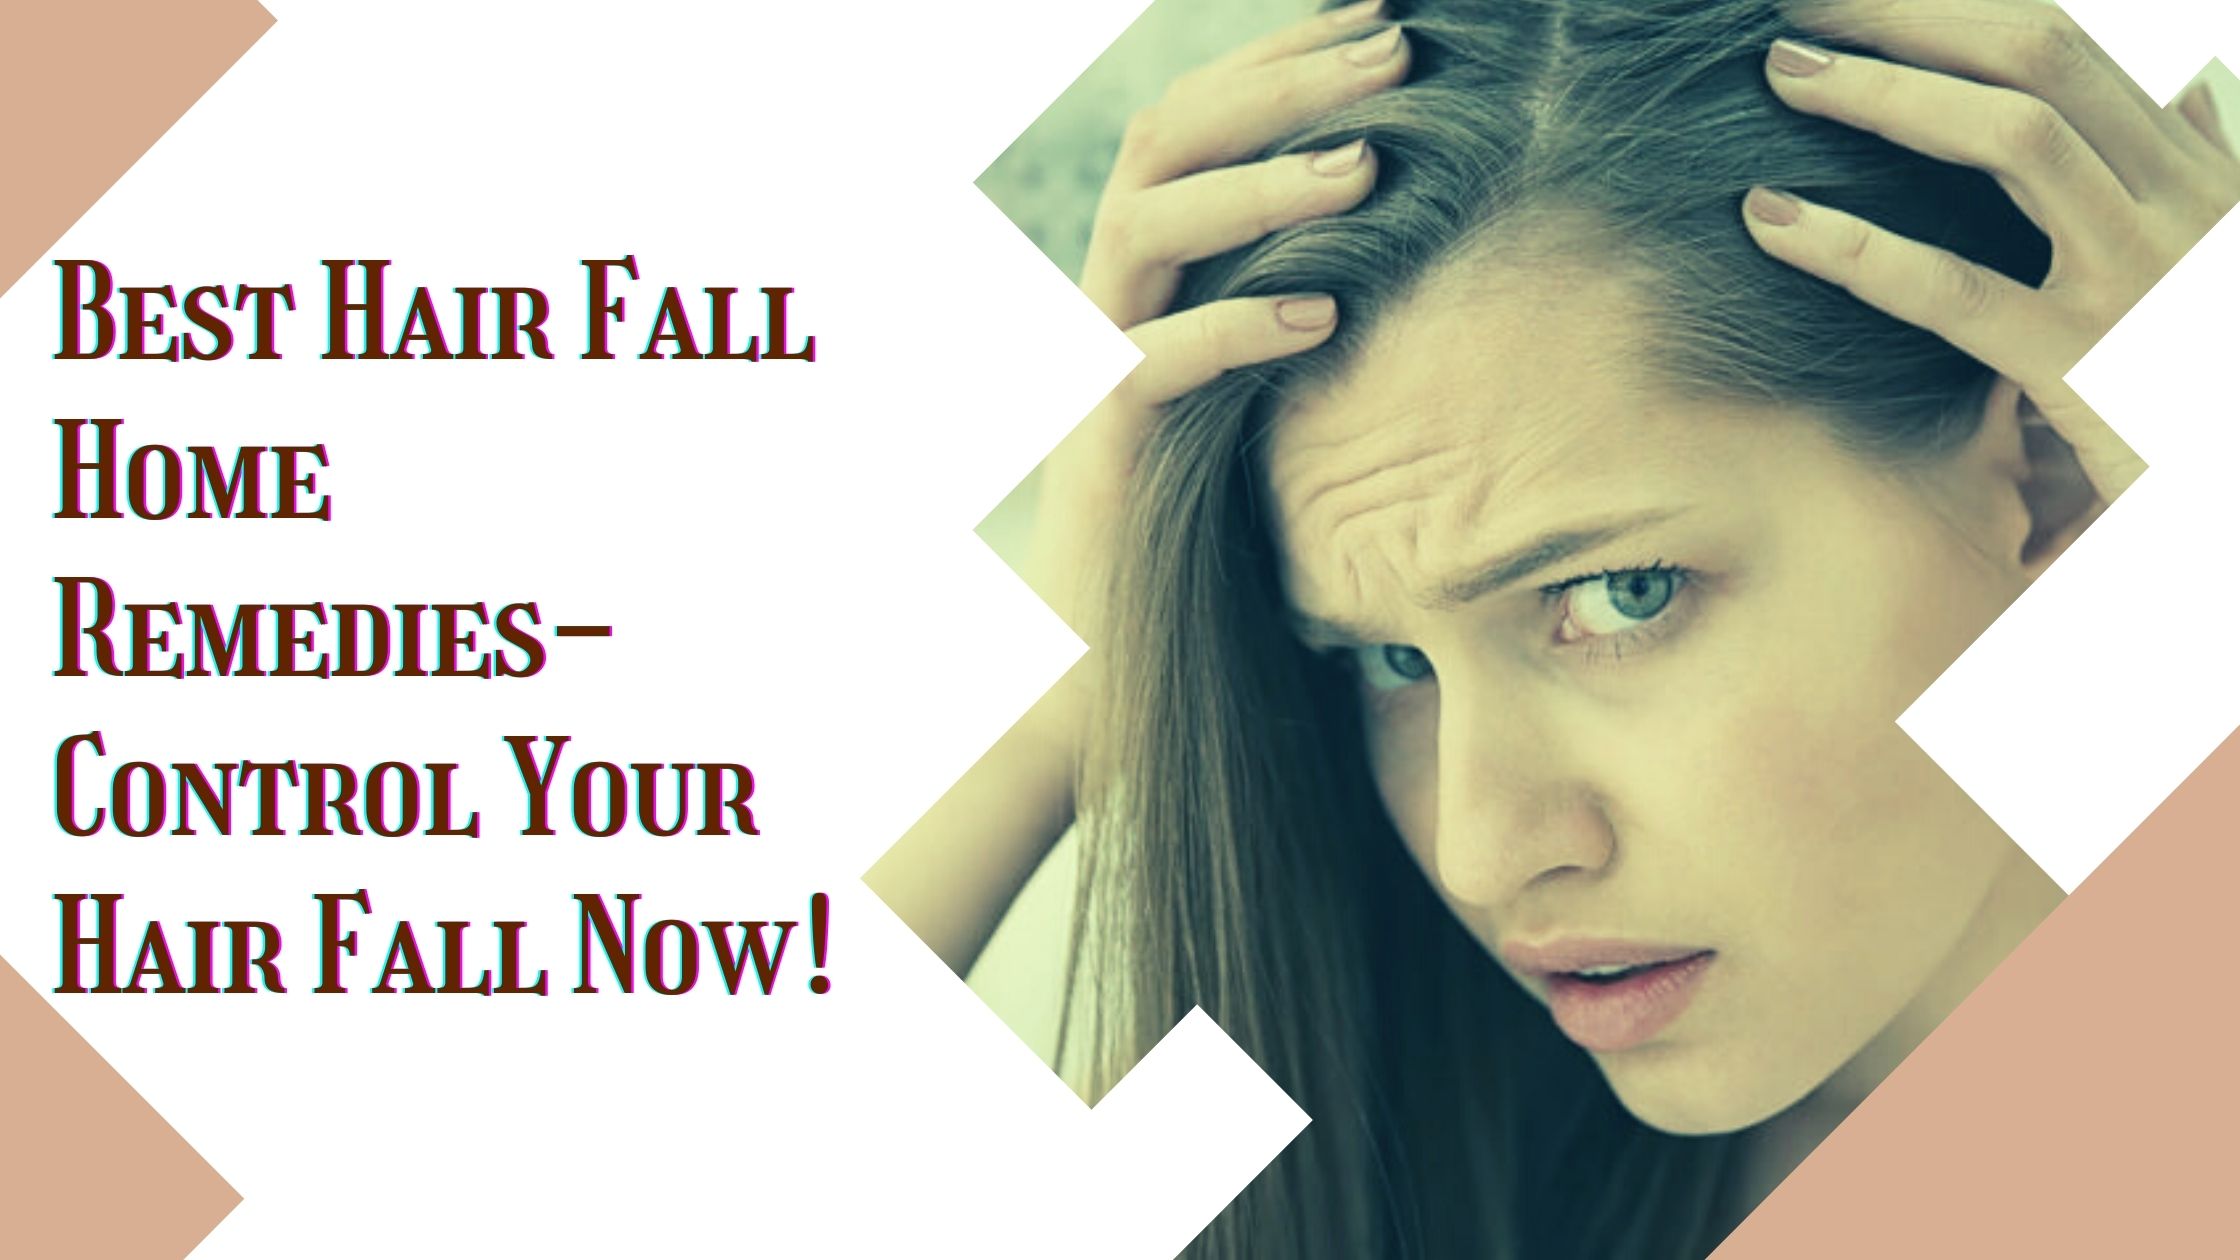 10 Best Home Remedy For Hair Fall- Control Your Hair Fall!